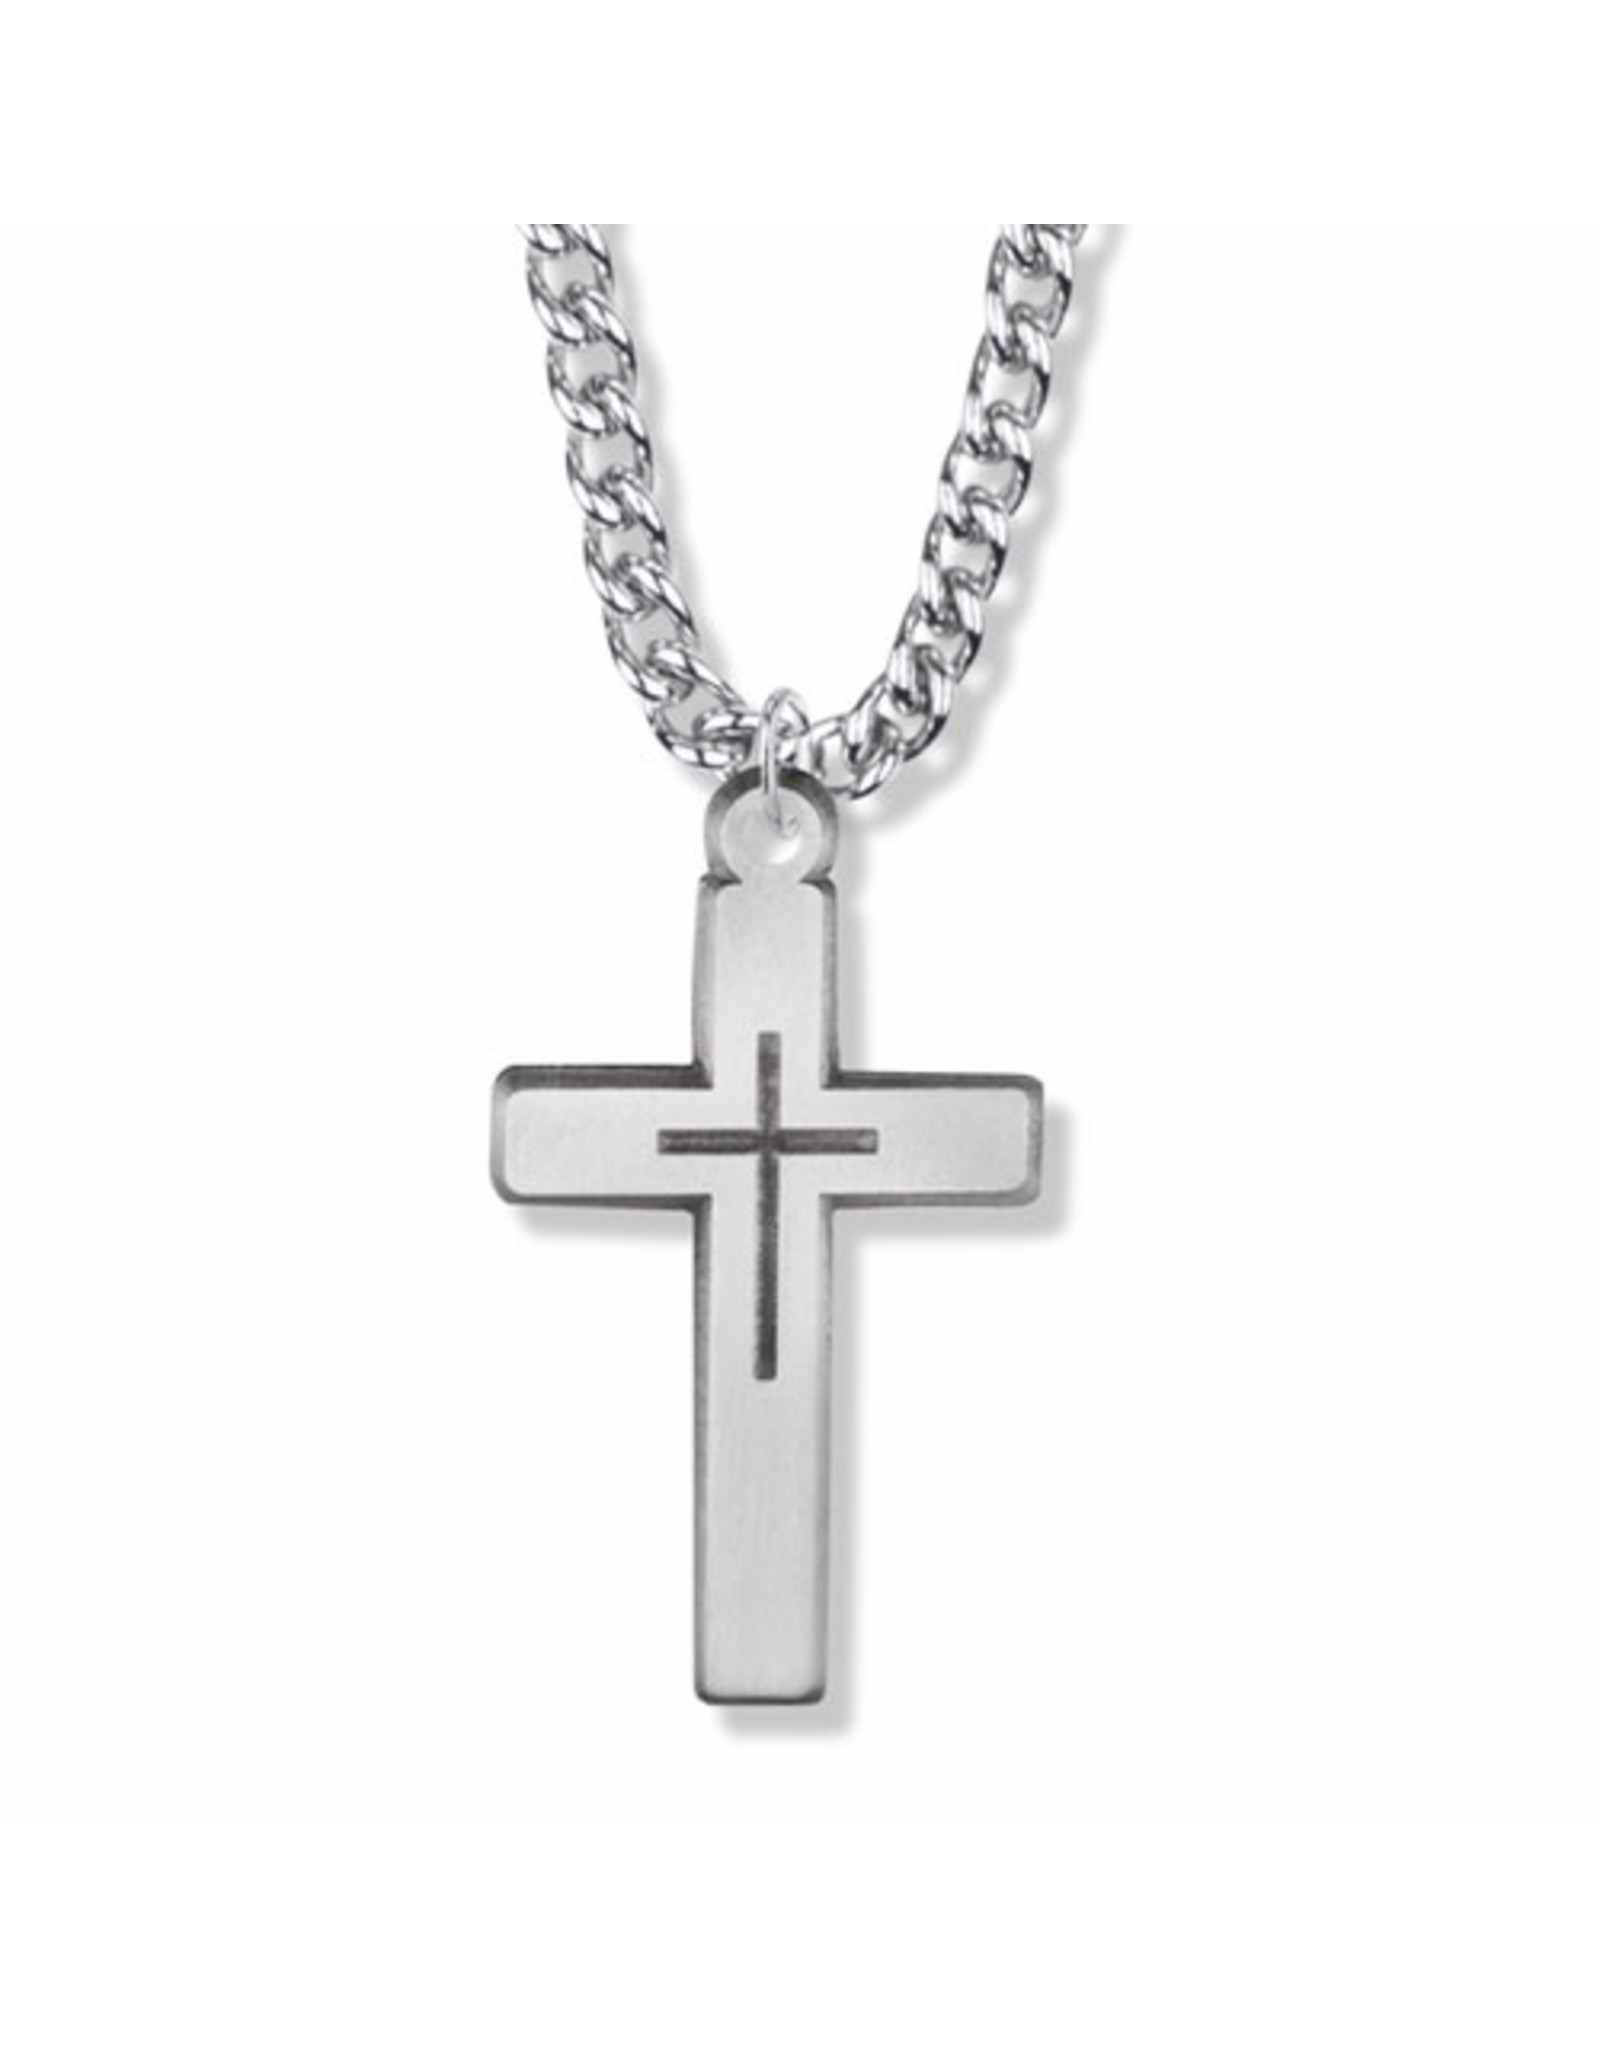 Pewter Pierced Cross Necklace on 24" Chain